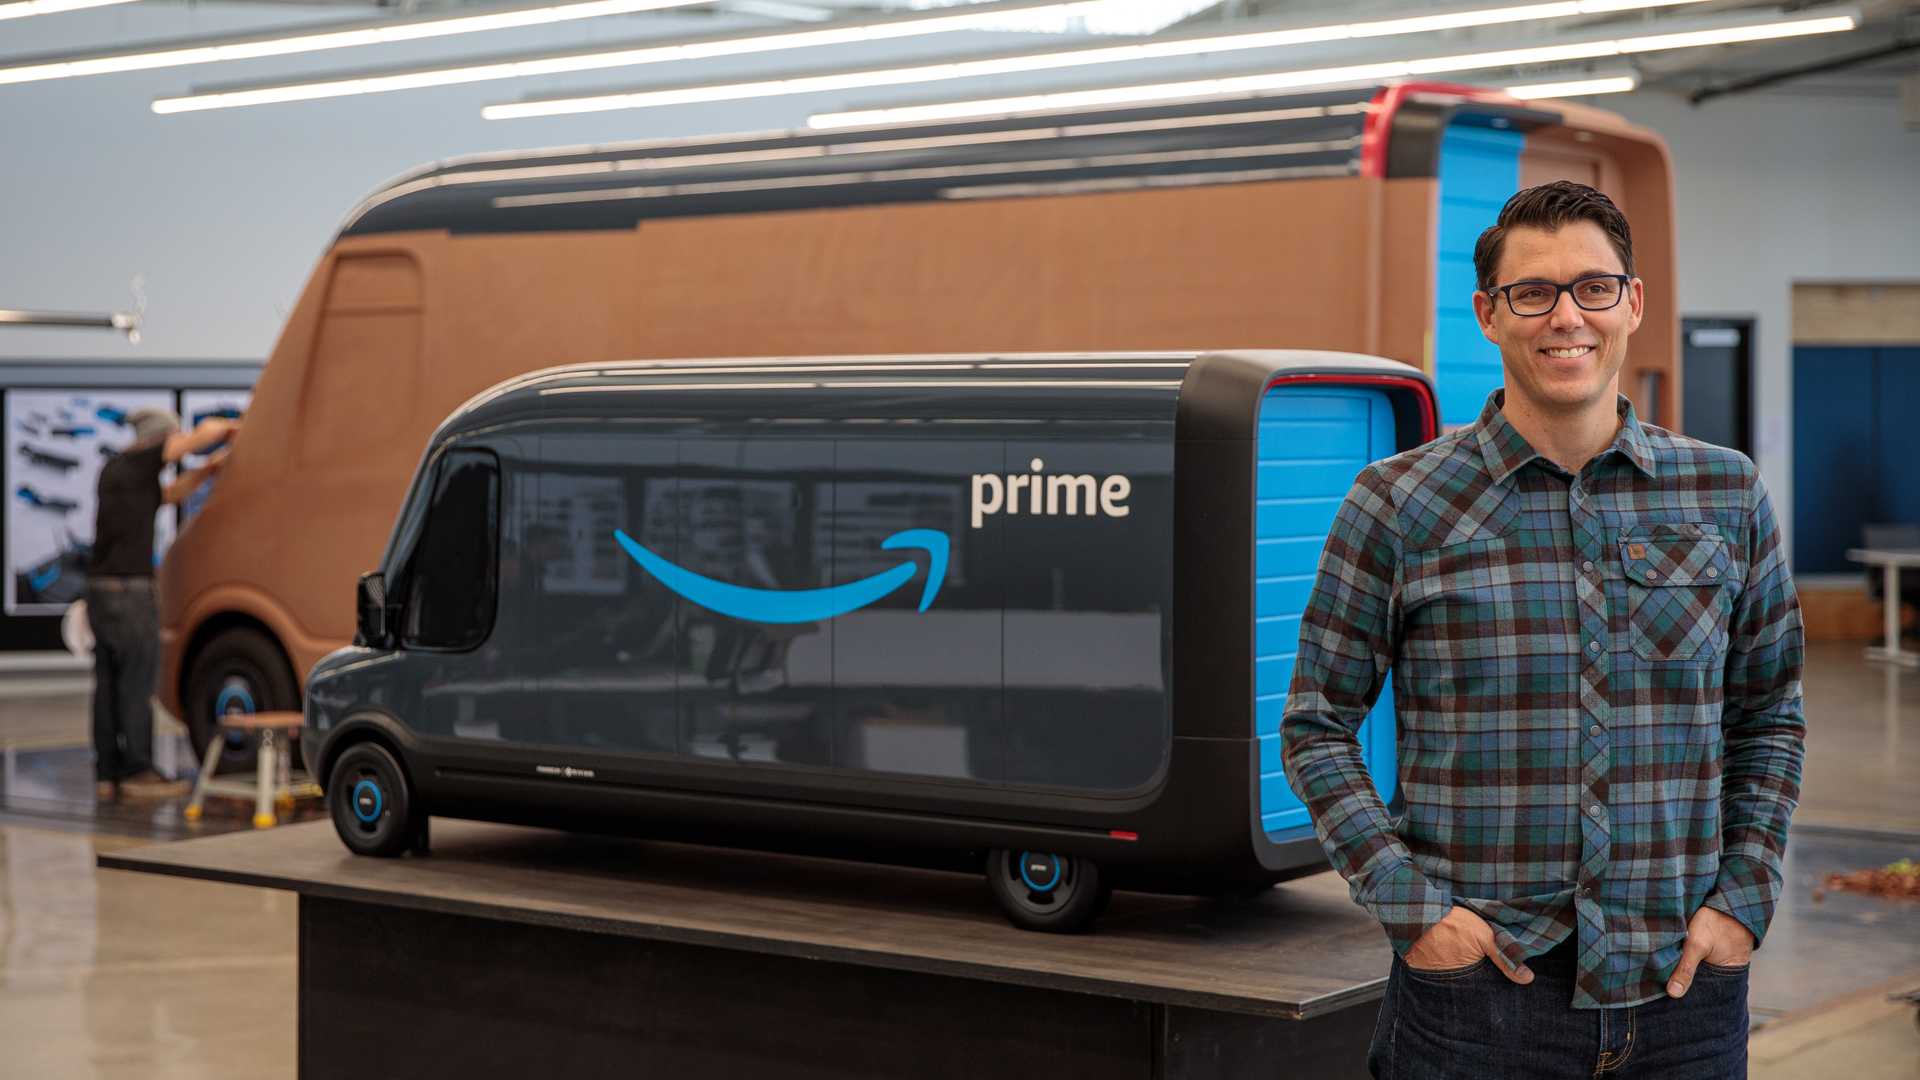 Rivian founder and CEO RJ Scaringe in front of EDV for Amazon Prime